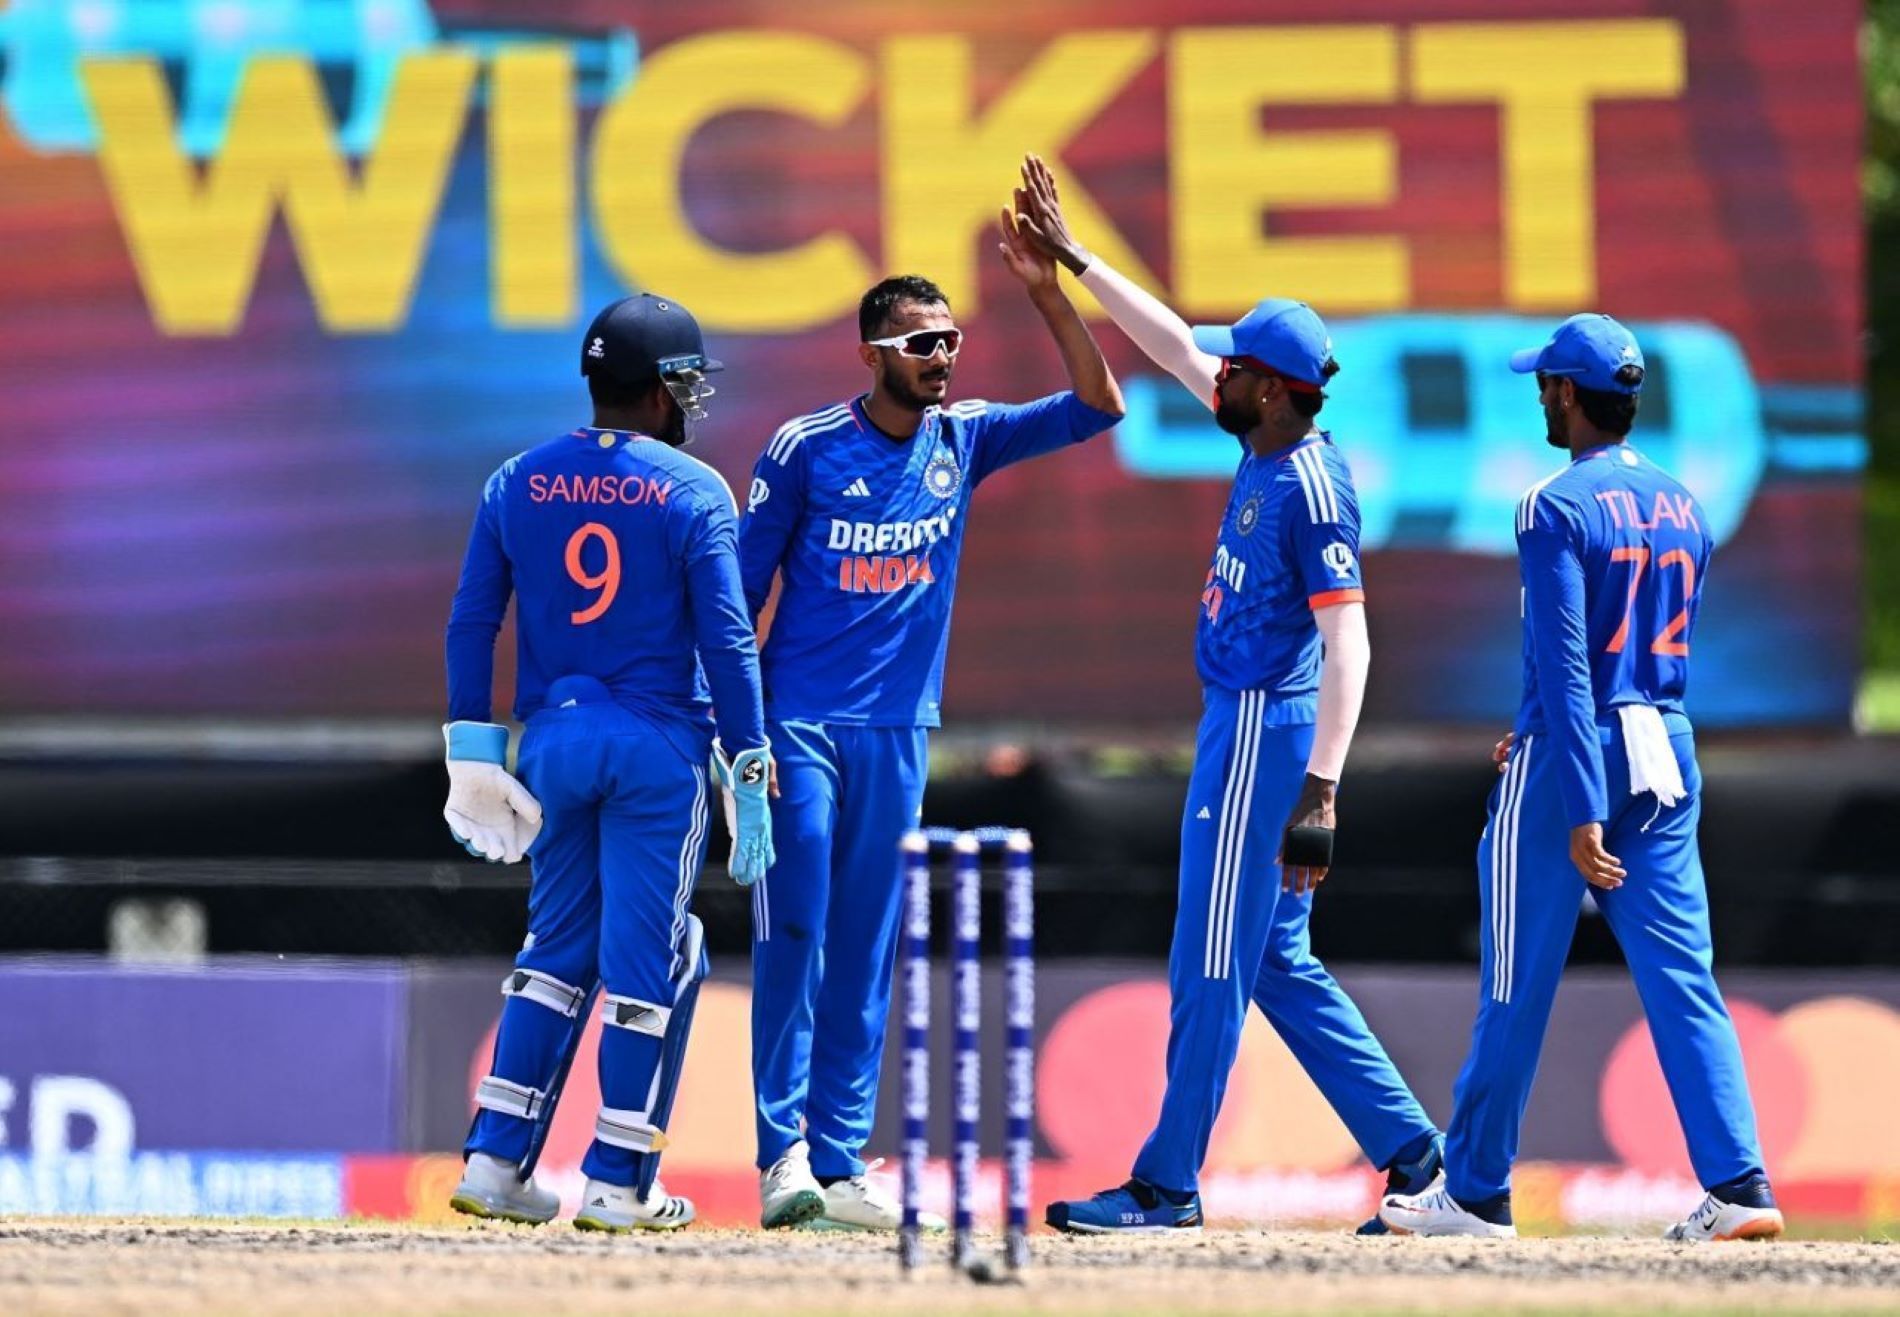 A collective bowling performance saw India restrict the hosts to a chasable target.